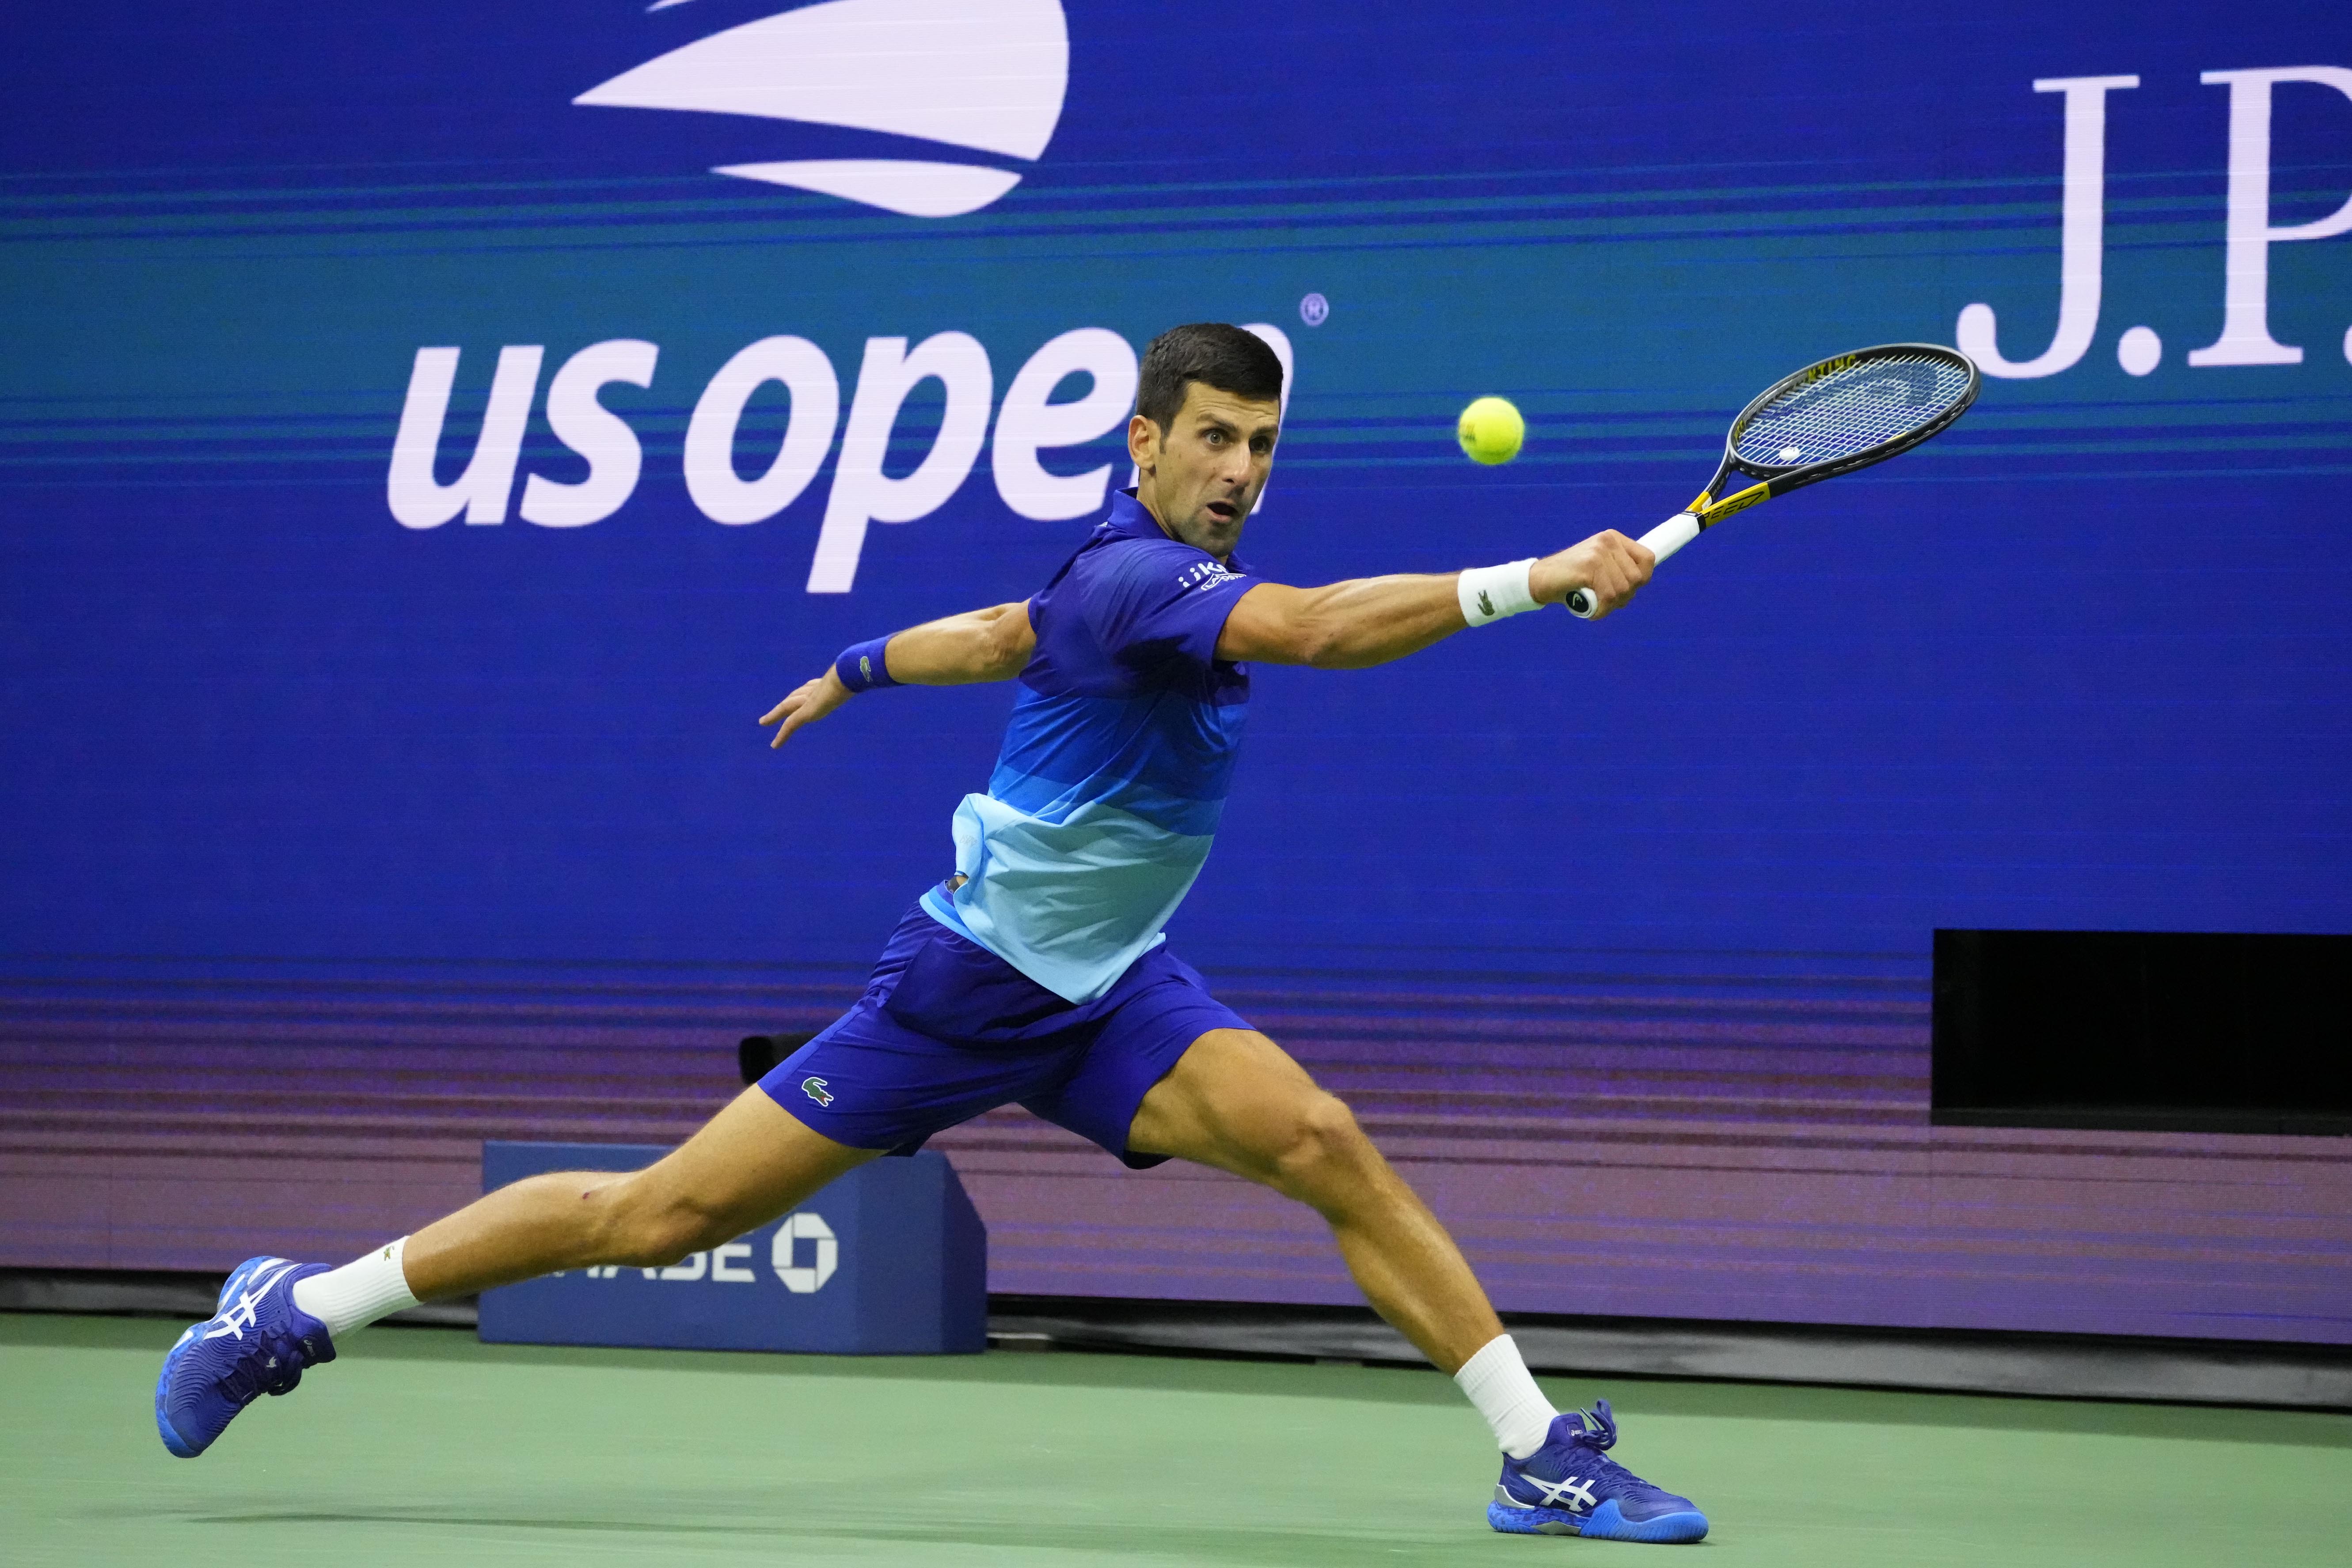 Djokovic will miss U.S. Open as unable to travel to New York without